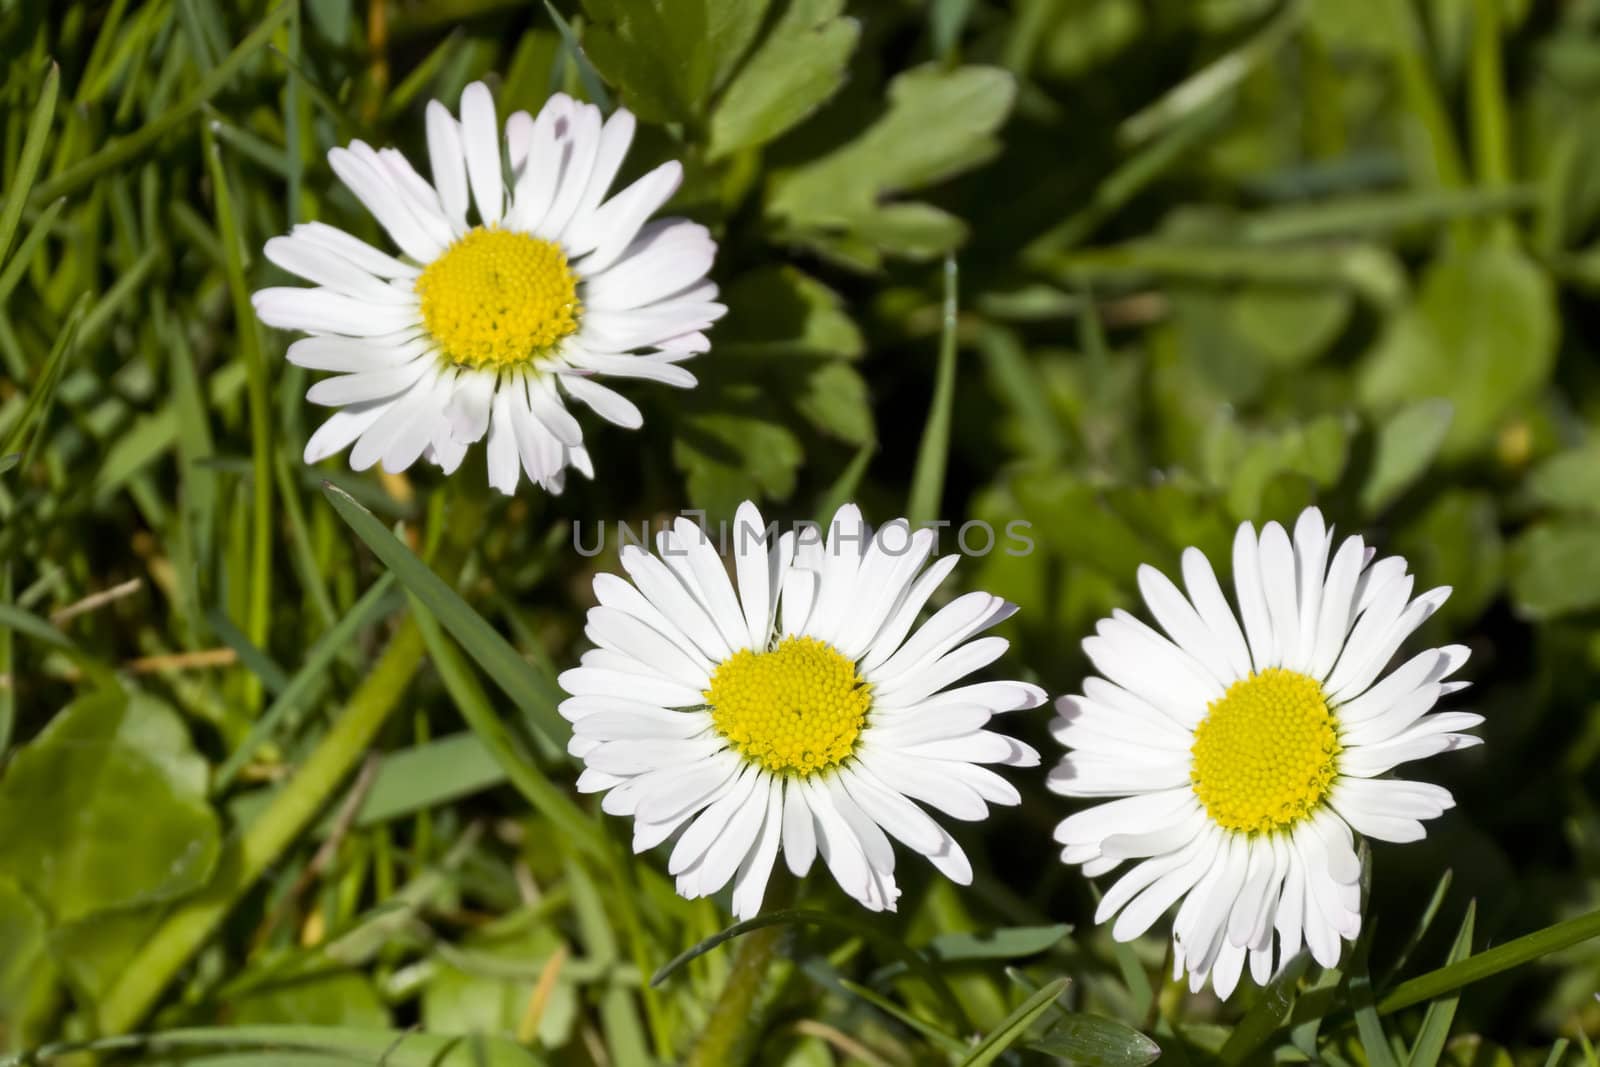 This image shows a macro from 3 little daisy